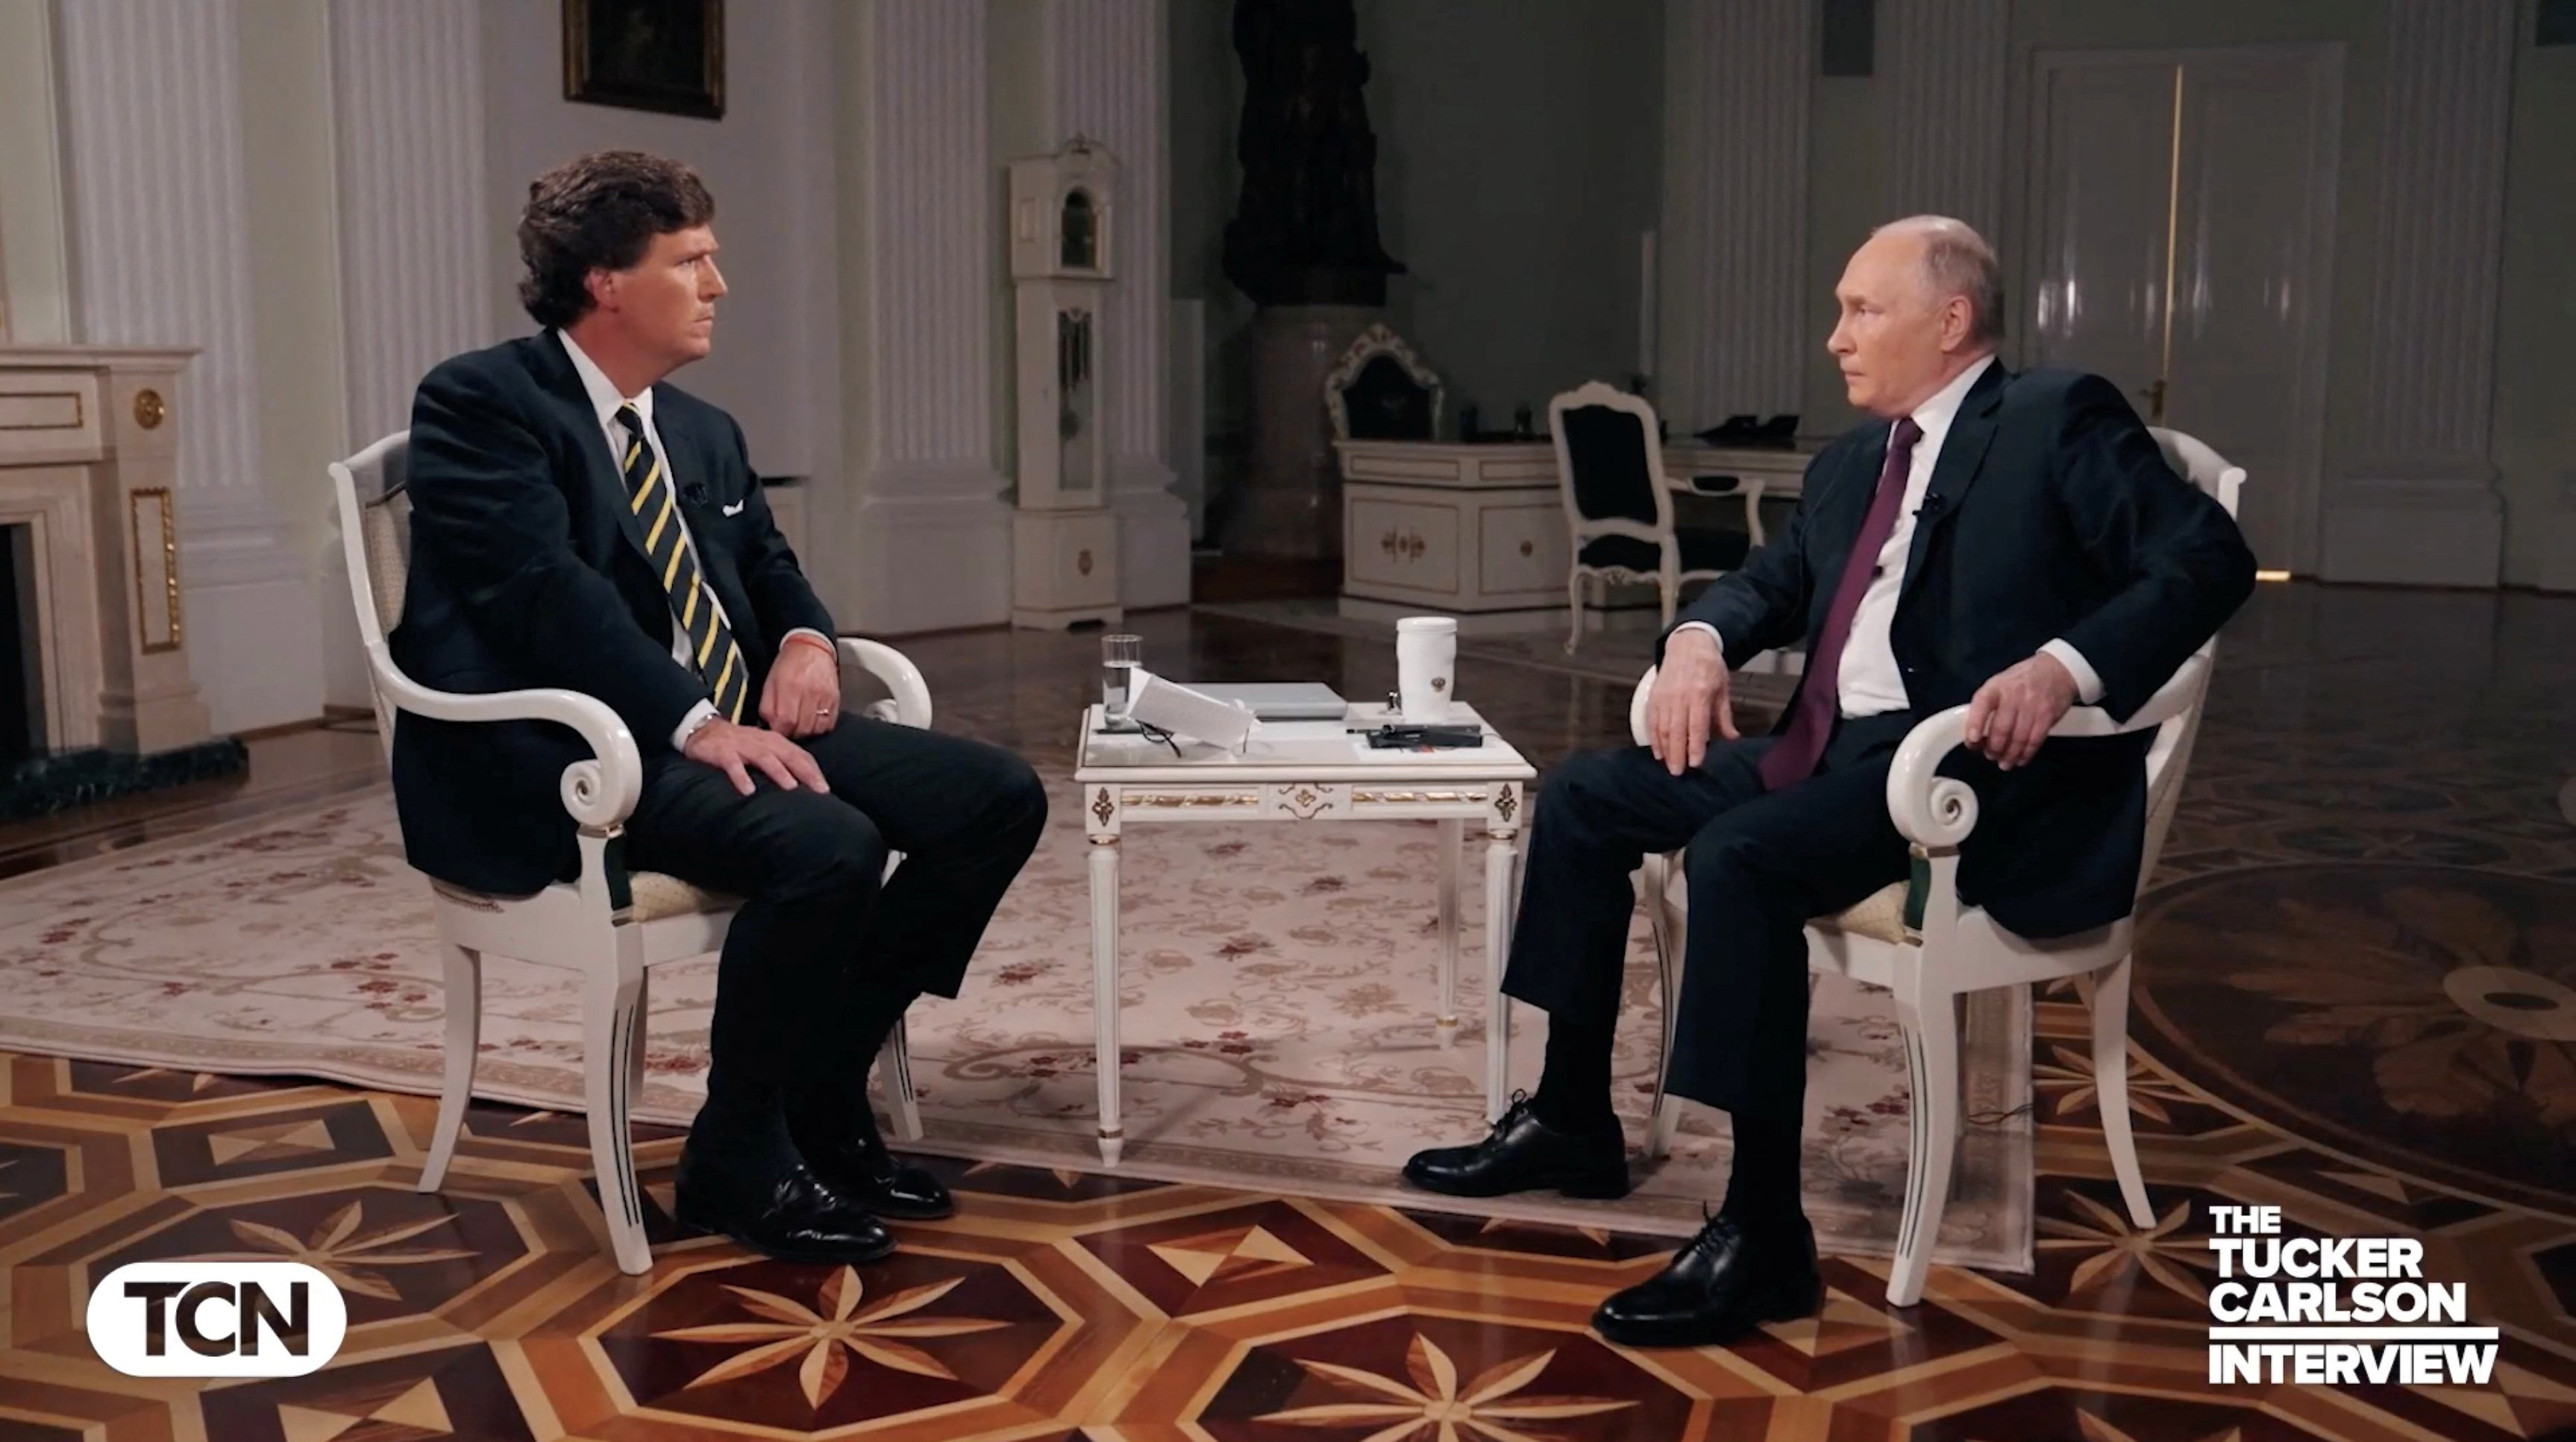 Russian President Vladimir Putin speaks during an interview with US television host Tucker Carlson in Moscow on February 6, in this still image taken from video released February 8. Photo: Tucker Carlson Network/Handout 